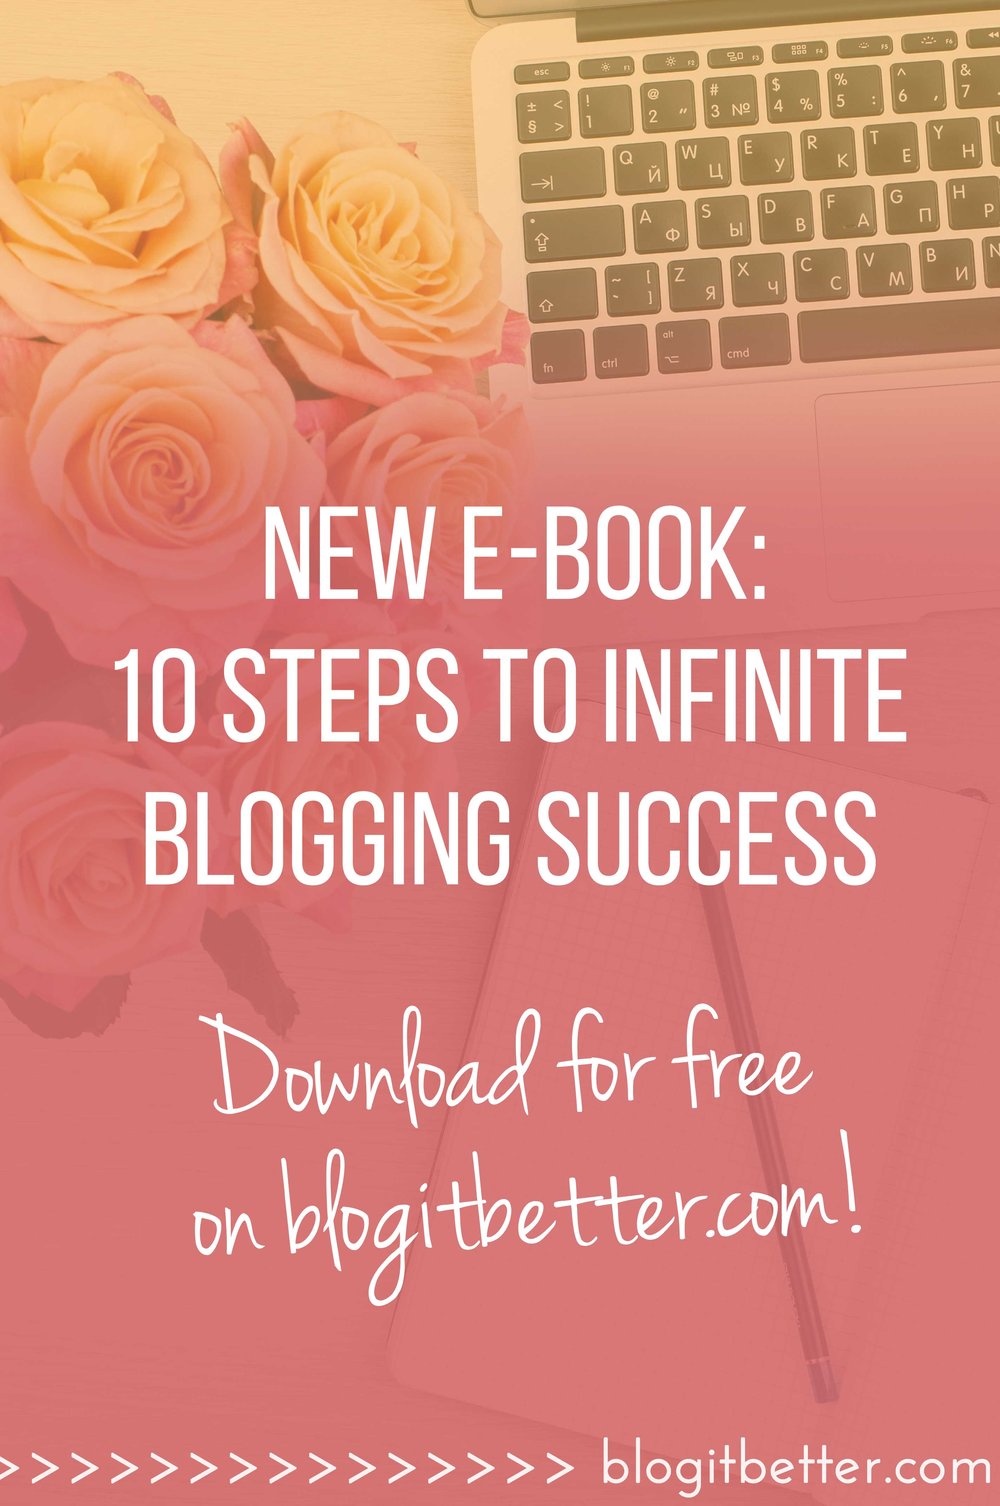 10 valuable insights into blogging, for bloggers who want to increase their influence and grow their following! Fee e-book download